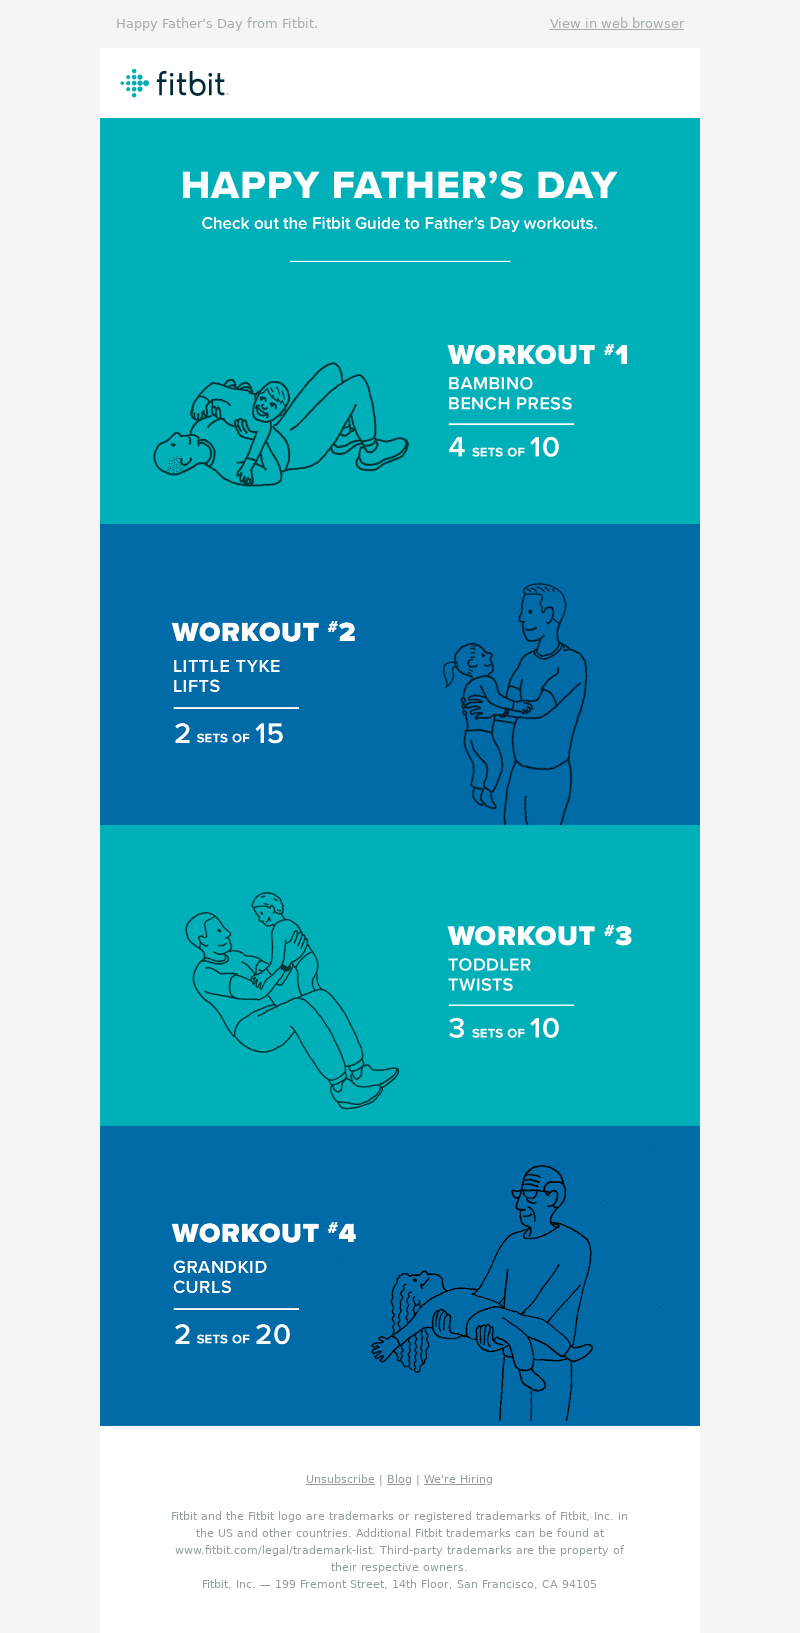 Father’s Day email from Fitbit